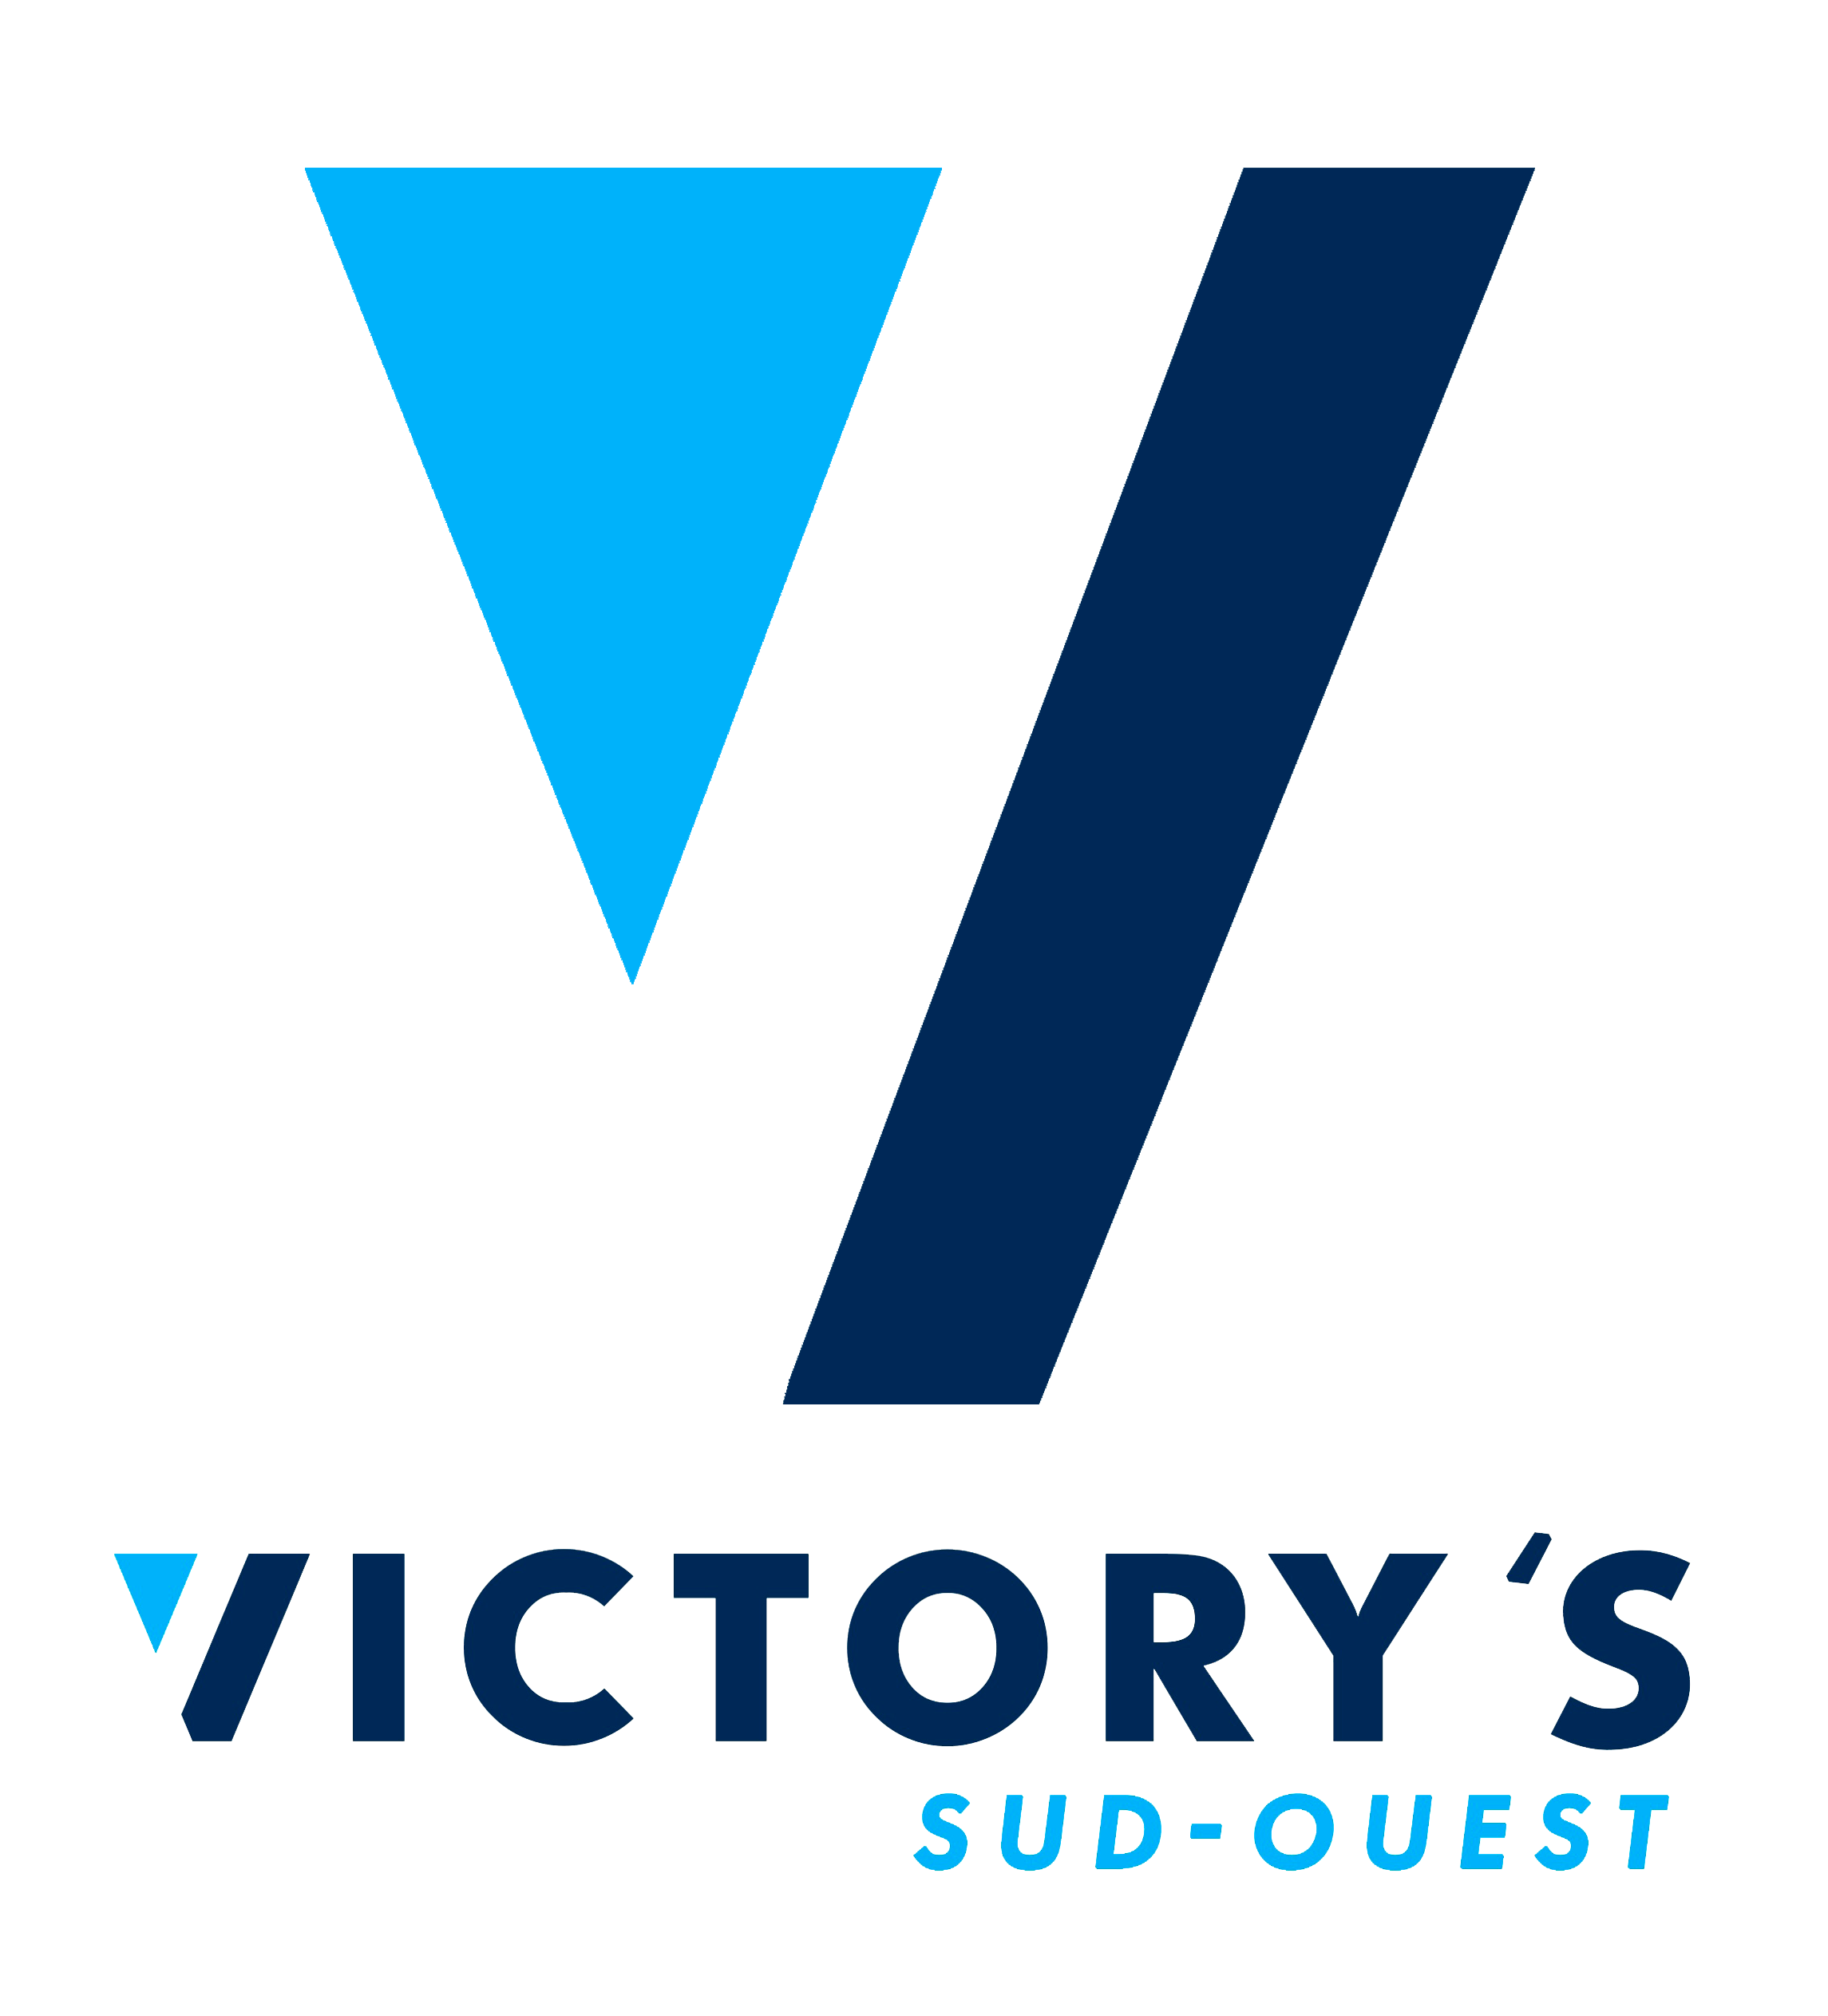 VICTORY'S SUD OUEST